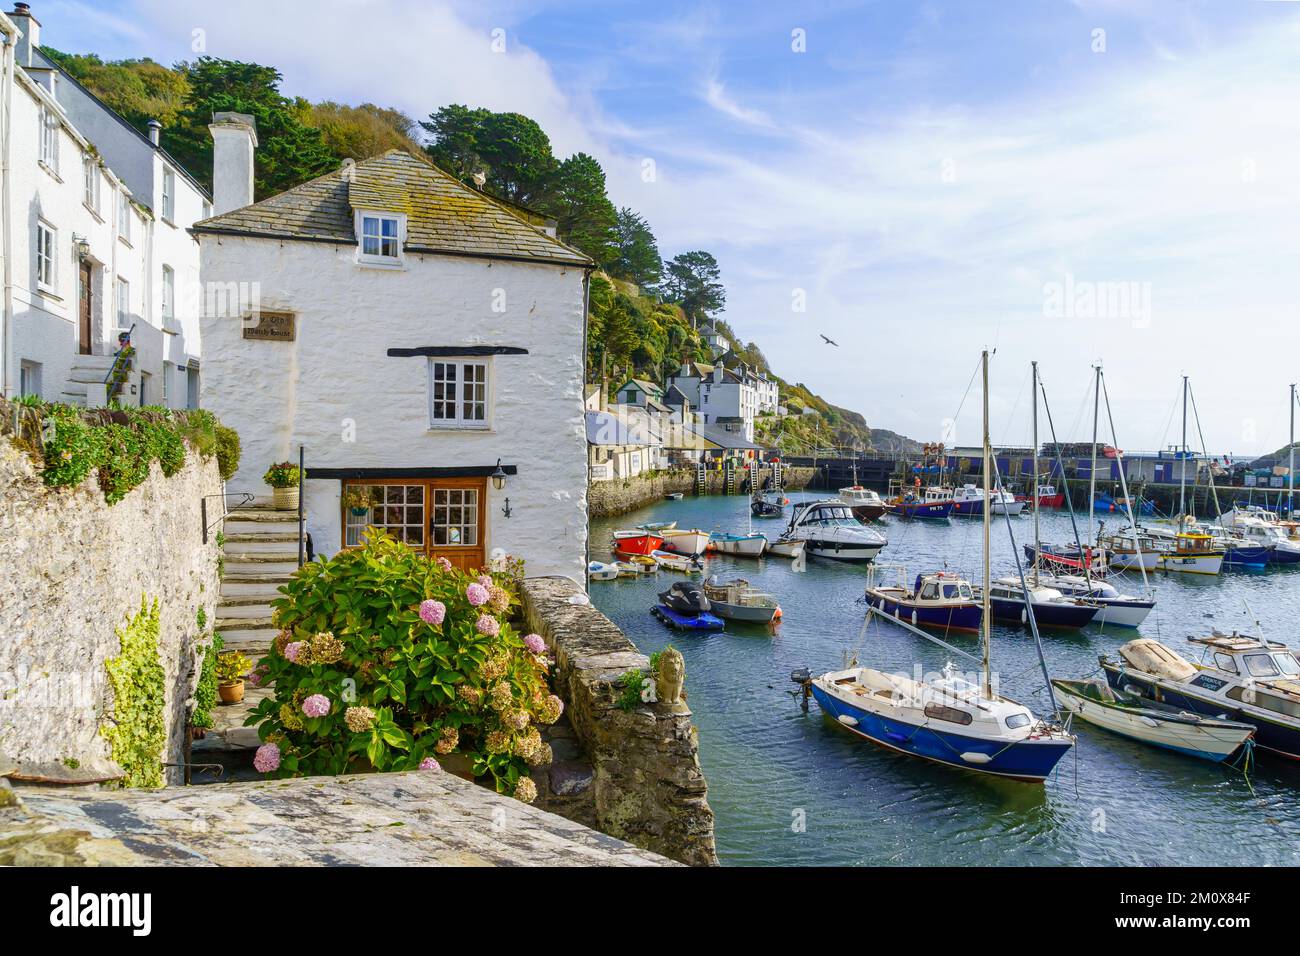 Polperro, UK - October 16, 2022: View of the fishing port of the village Polperro, in Cornwall, England, UK Stock Photo